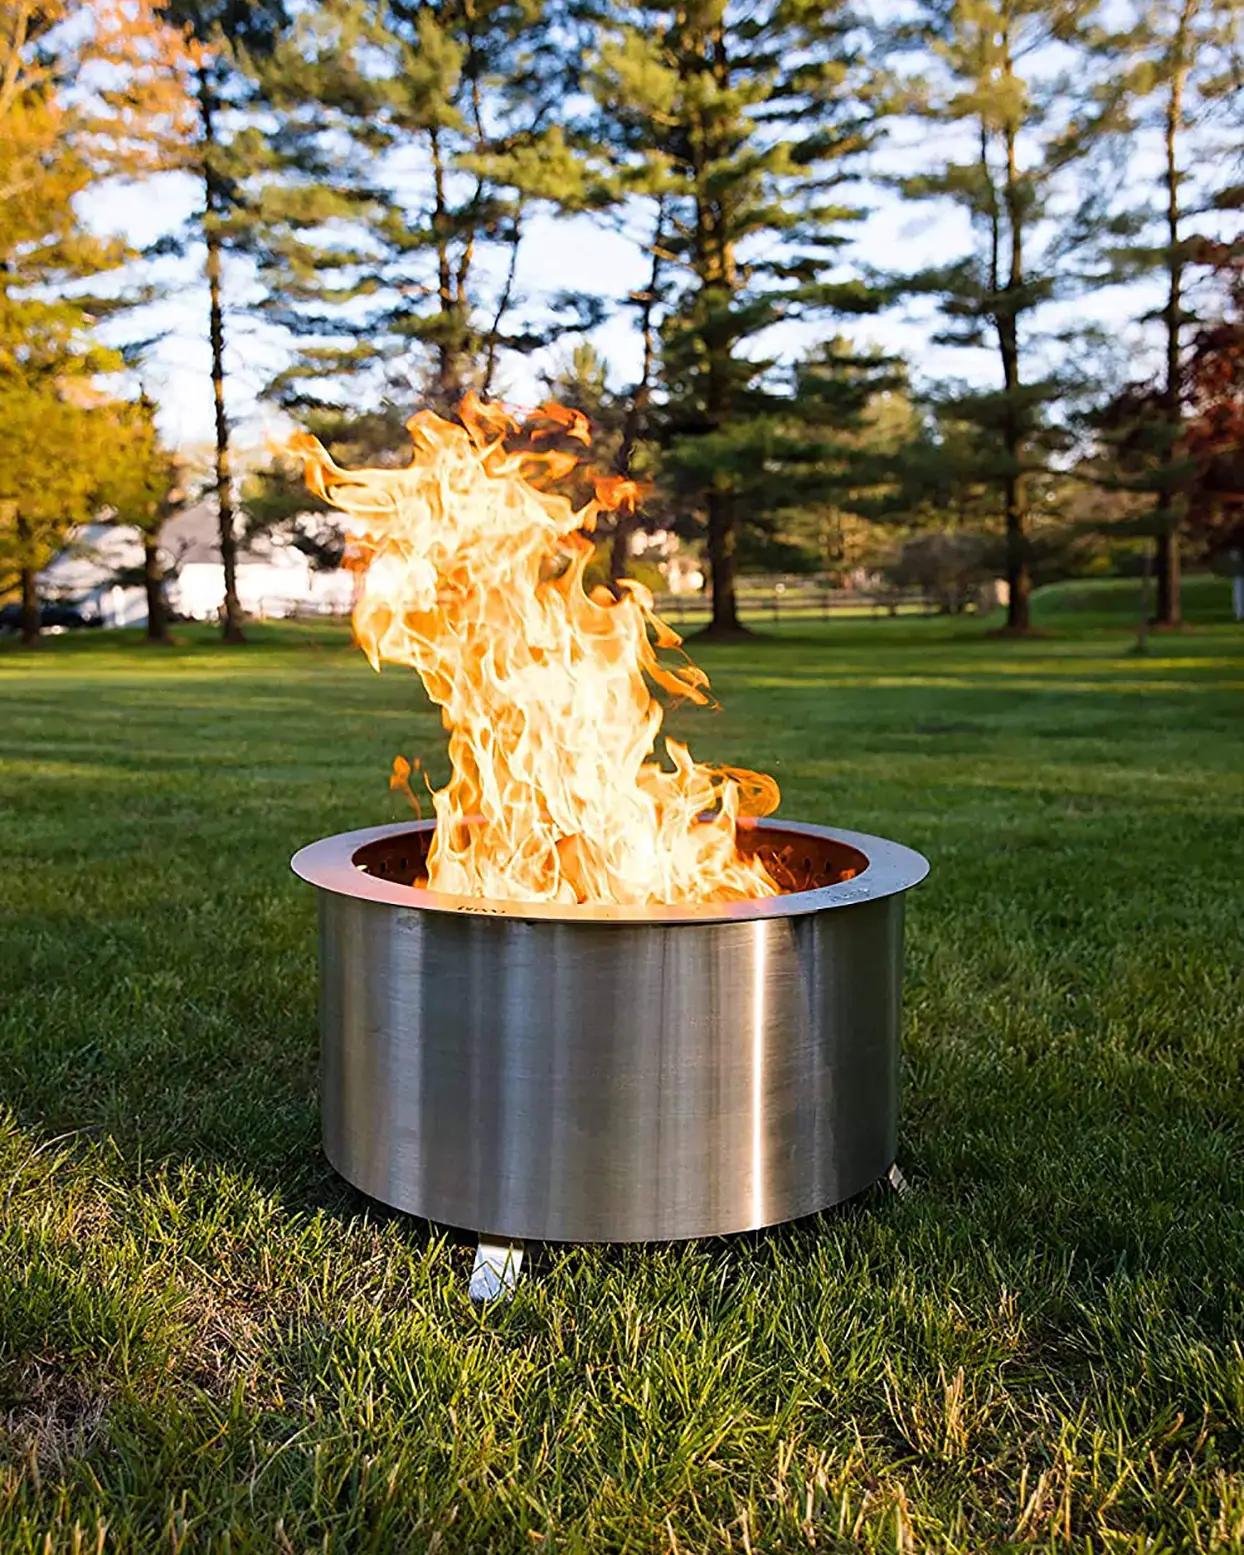 Best Smokeless Fire Pit - The Complete Guide 2022